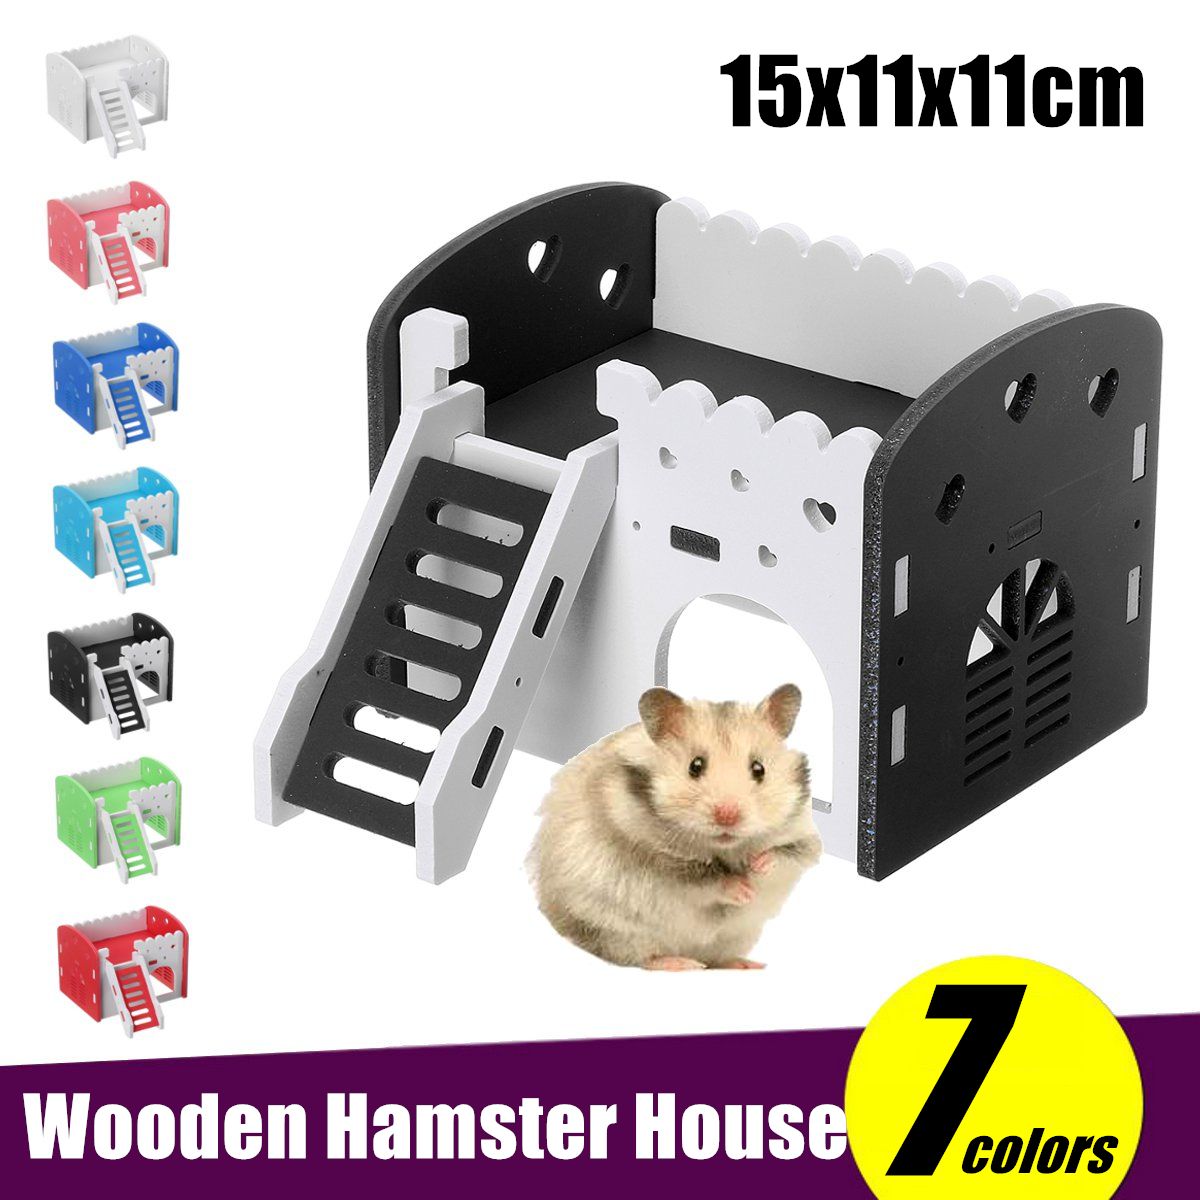 Dual-Layer-Ladder-Hamster-House-Small-Animal-Pet-Mouse-Cage-Castle-Exercise-Toys-1632243